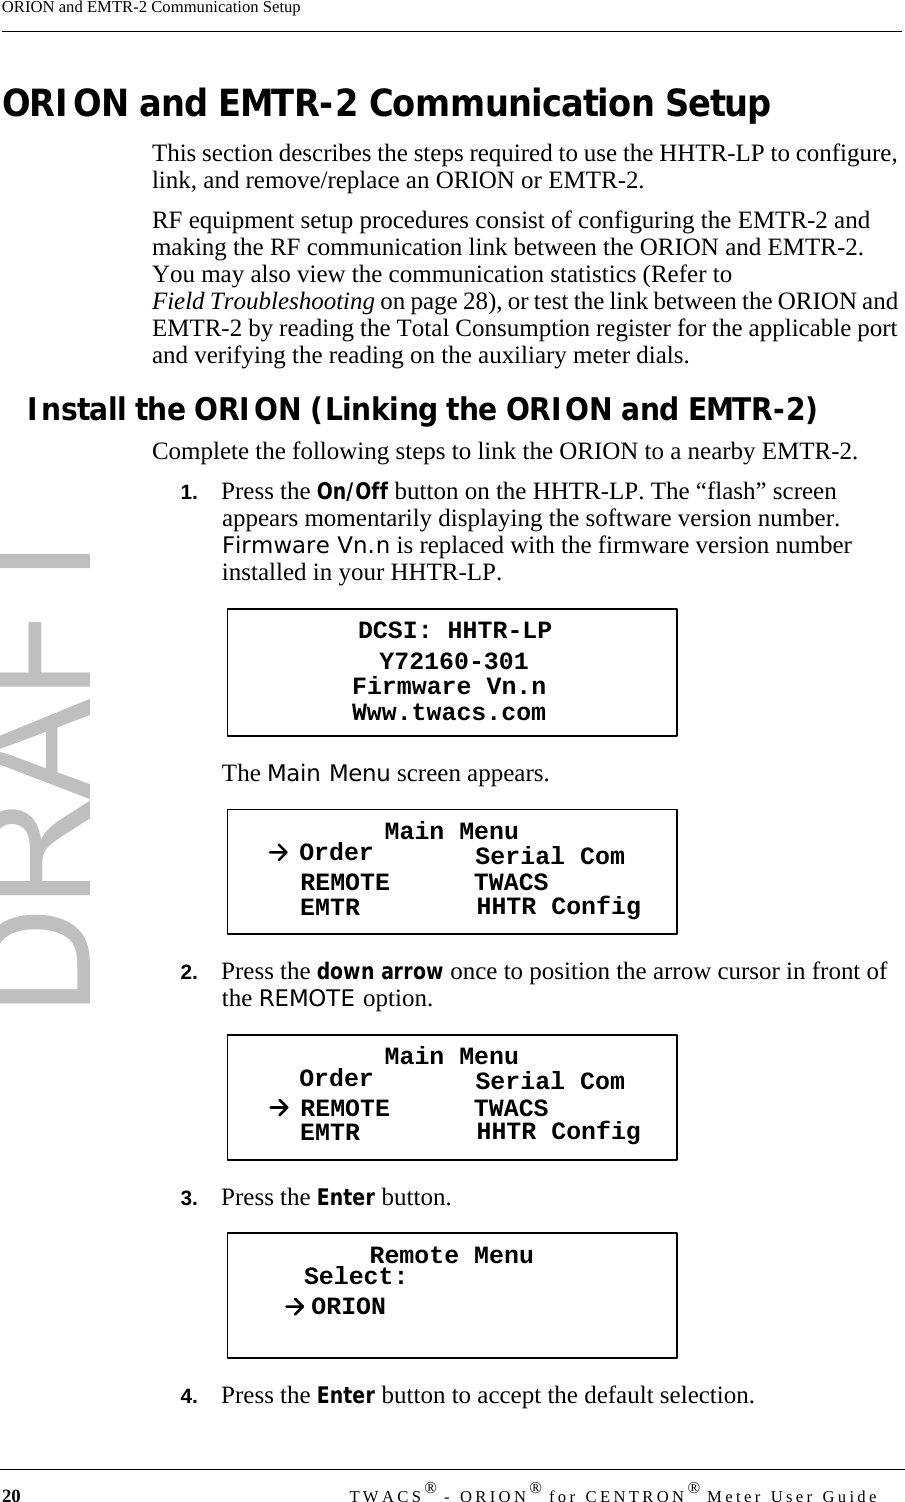 DRAFT20 TWACS® - ORION® for CENTRON® Meter User GuideORION and EMTR-2 Communication SetupORION and EMTR-2 Communication SetupThis section describes the steps required to use the HHTR-LP to configure, link, and remove/replace an ORION or EMTR-2. RF equipment setup procedures consist of configuring the EMTR-2 and making the RF communication link between the ORION and EMTR-2. You may also view the communication statistics (Refer to Field Troubleshooting on page 28), or test the link between the ORION and EMTR-2 by reading the Total Consumption register for the applicable port and verifying the reading on the auxiliary meter dials.Install the ORION (Linking the ORION and EMTR-2)Complete the following steps to link the ORION to a nearby EMTR-2.1.   Press the On/Off button on the HHTR-LP. The “flash” screen appears momentarily displaying the software version number. Firmware Vn.n is replaced with the firmware version number installed in your HHTR-LP.The Main Menu screen appears.2.   Press the down arrow once to position the arrow cursor in front of the REMOTE option.3.   Press the Enter button. 4.   Press the Enter button to accept the default selection.DCSI: HHTR-LPY72160-301Www.twacs.comFirmware Vn.nMain MenuOrder Serial ComREMOTEEMTR TWACSHHTR ConfigMain MenuOrder Serial ComREMOTEEMTR TWACSHHTR ConfigRemote MenuSelect:ORION